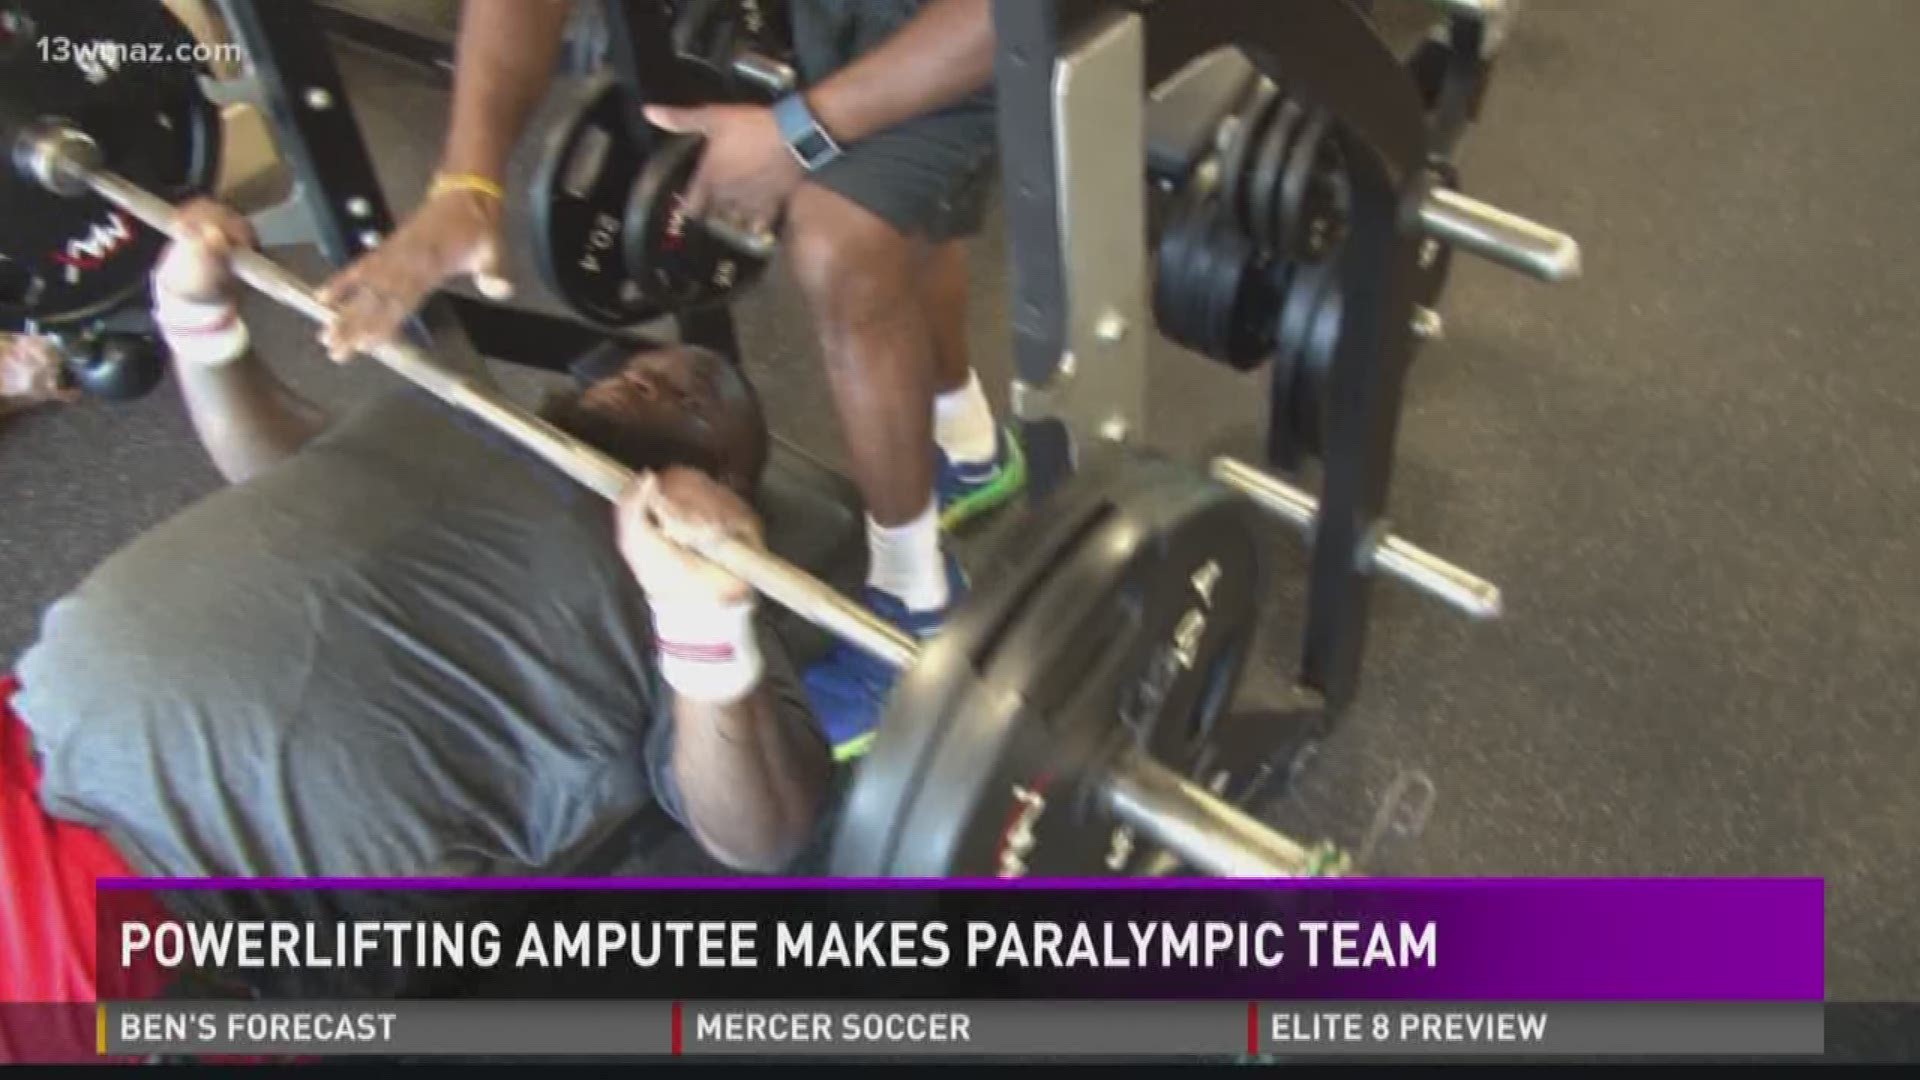 Powerlifting amputee makes paralympic team